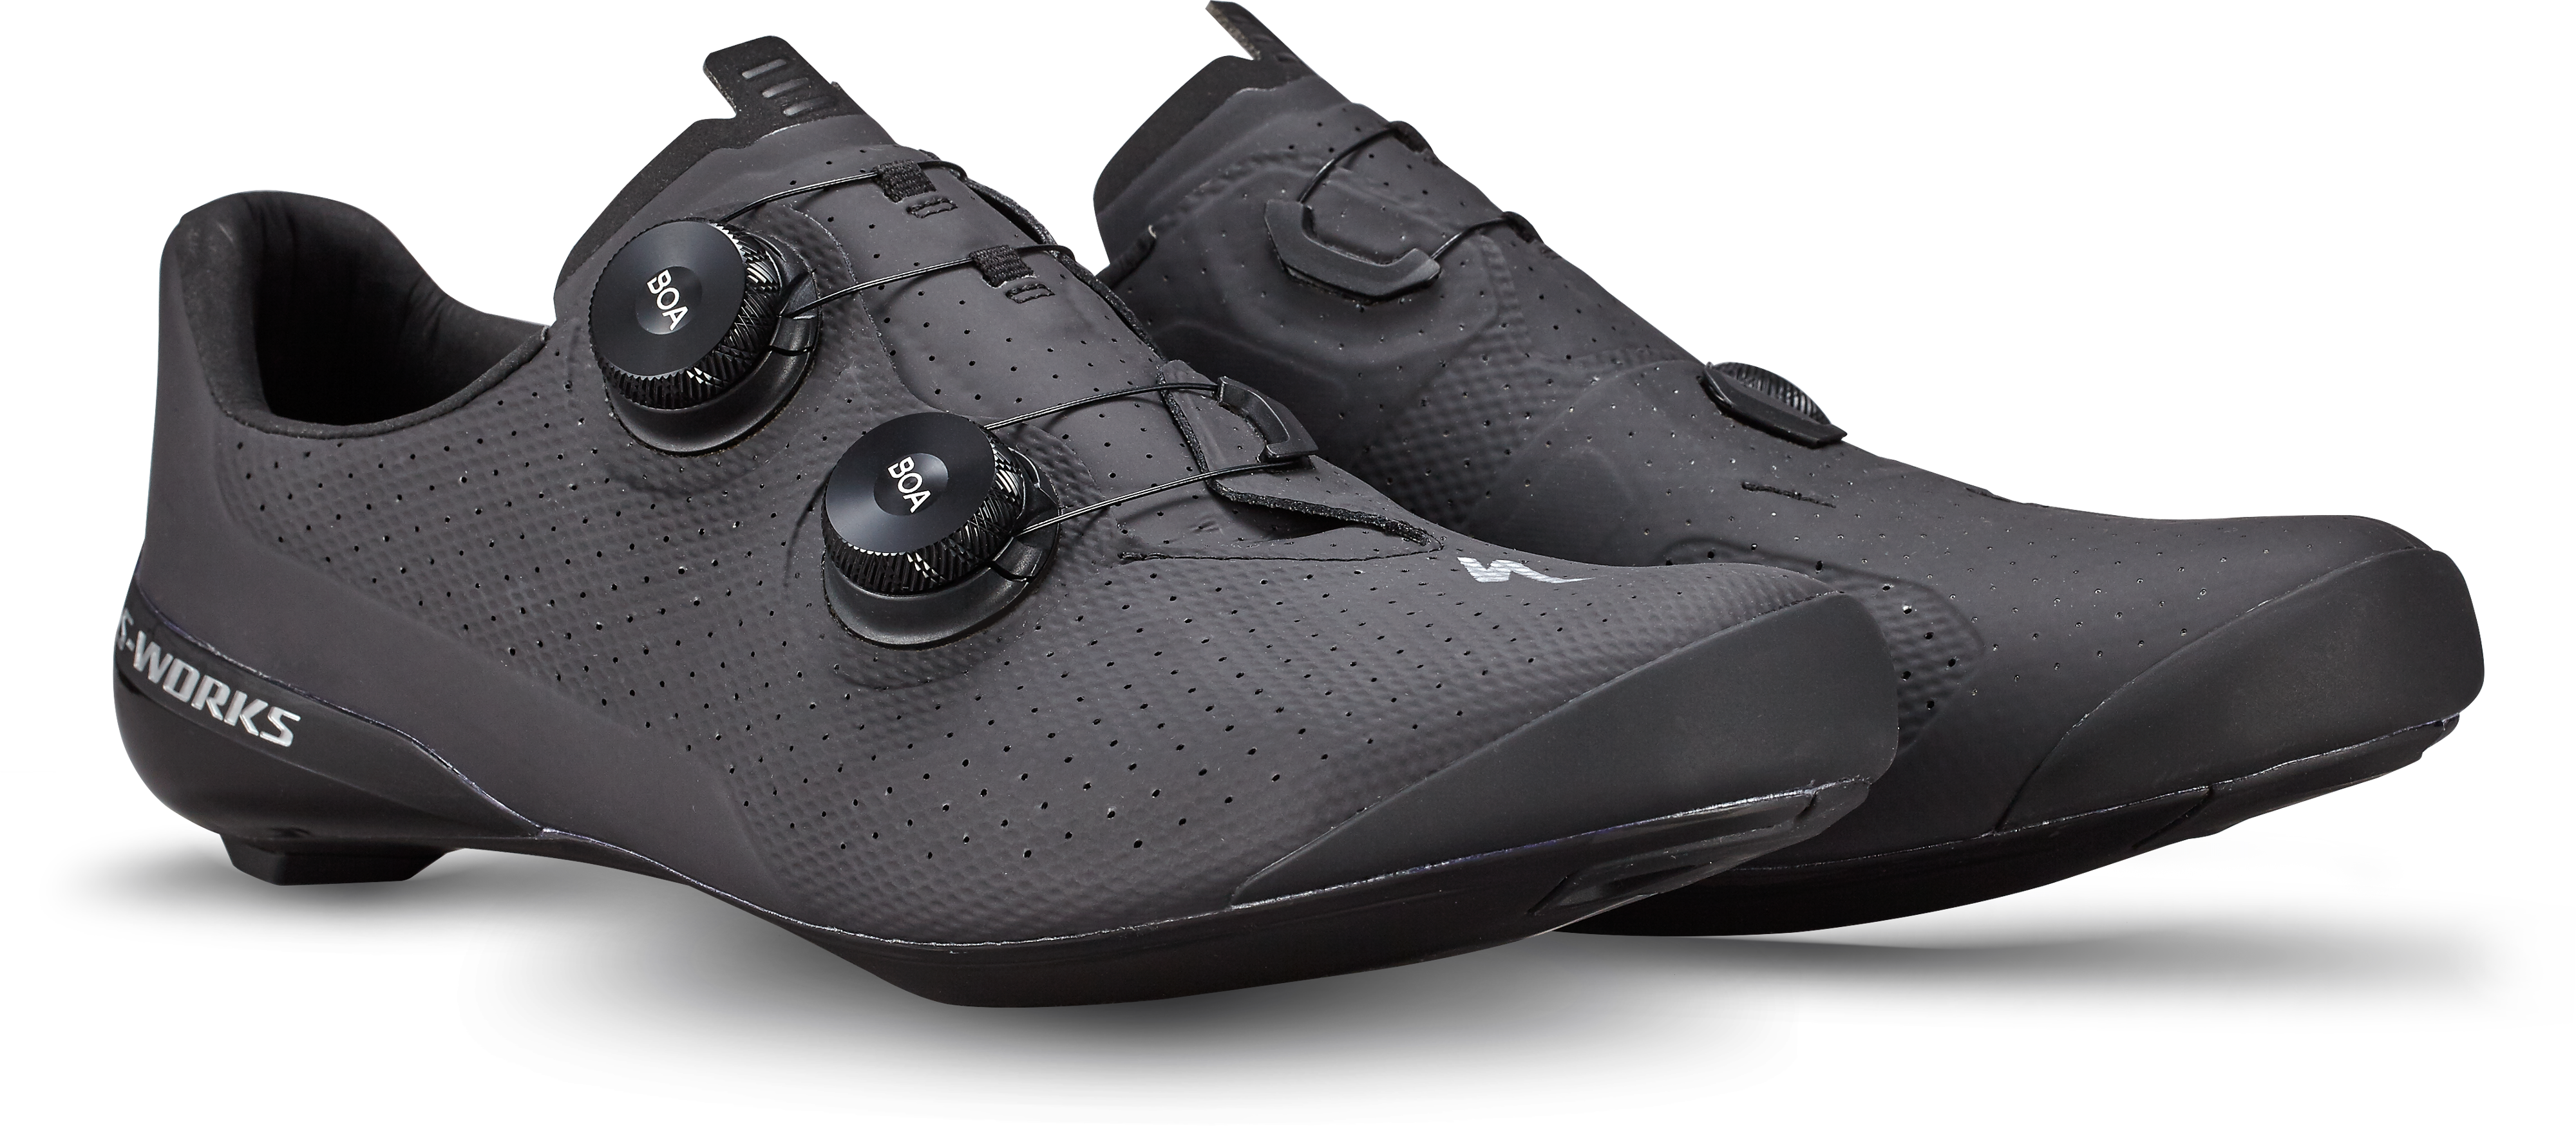 S-WORKS TORCH ROAD SHOES BLK 44(44 (28.3cm) ブラック): シューズ